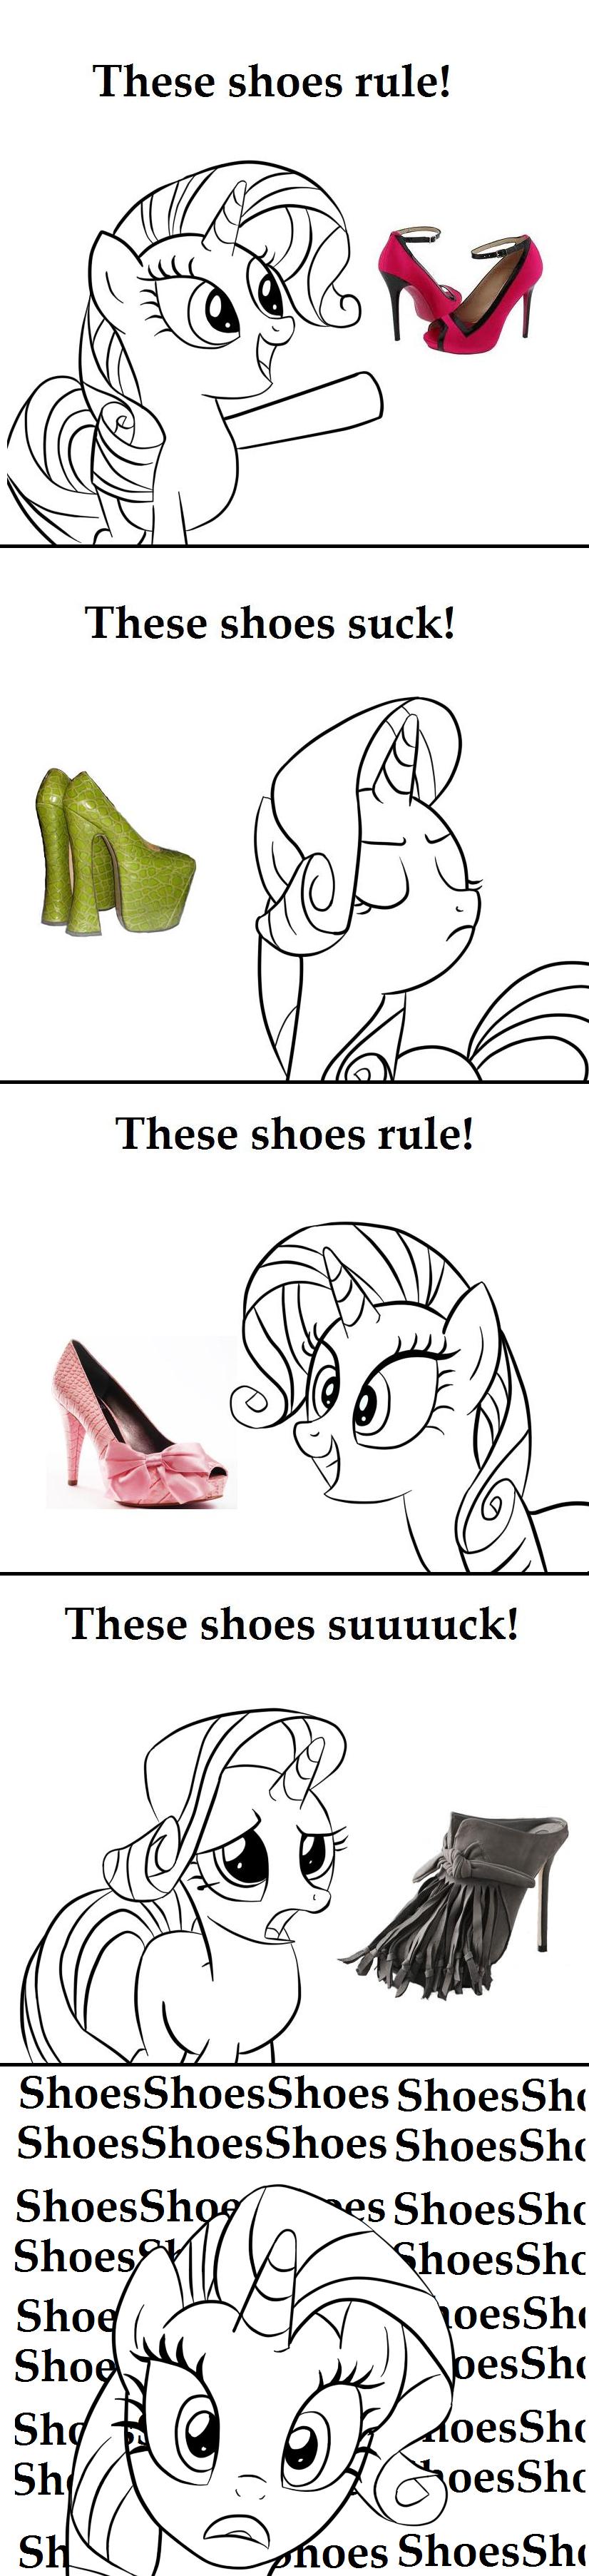 Rarity loves shoes